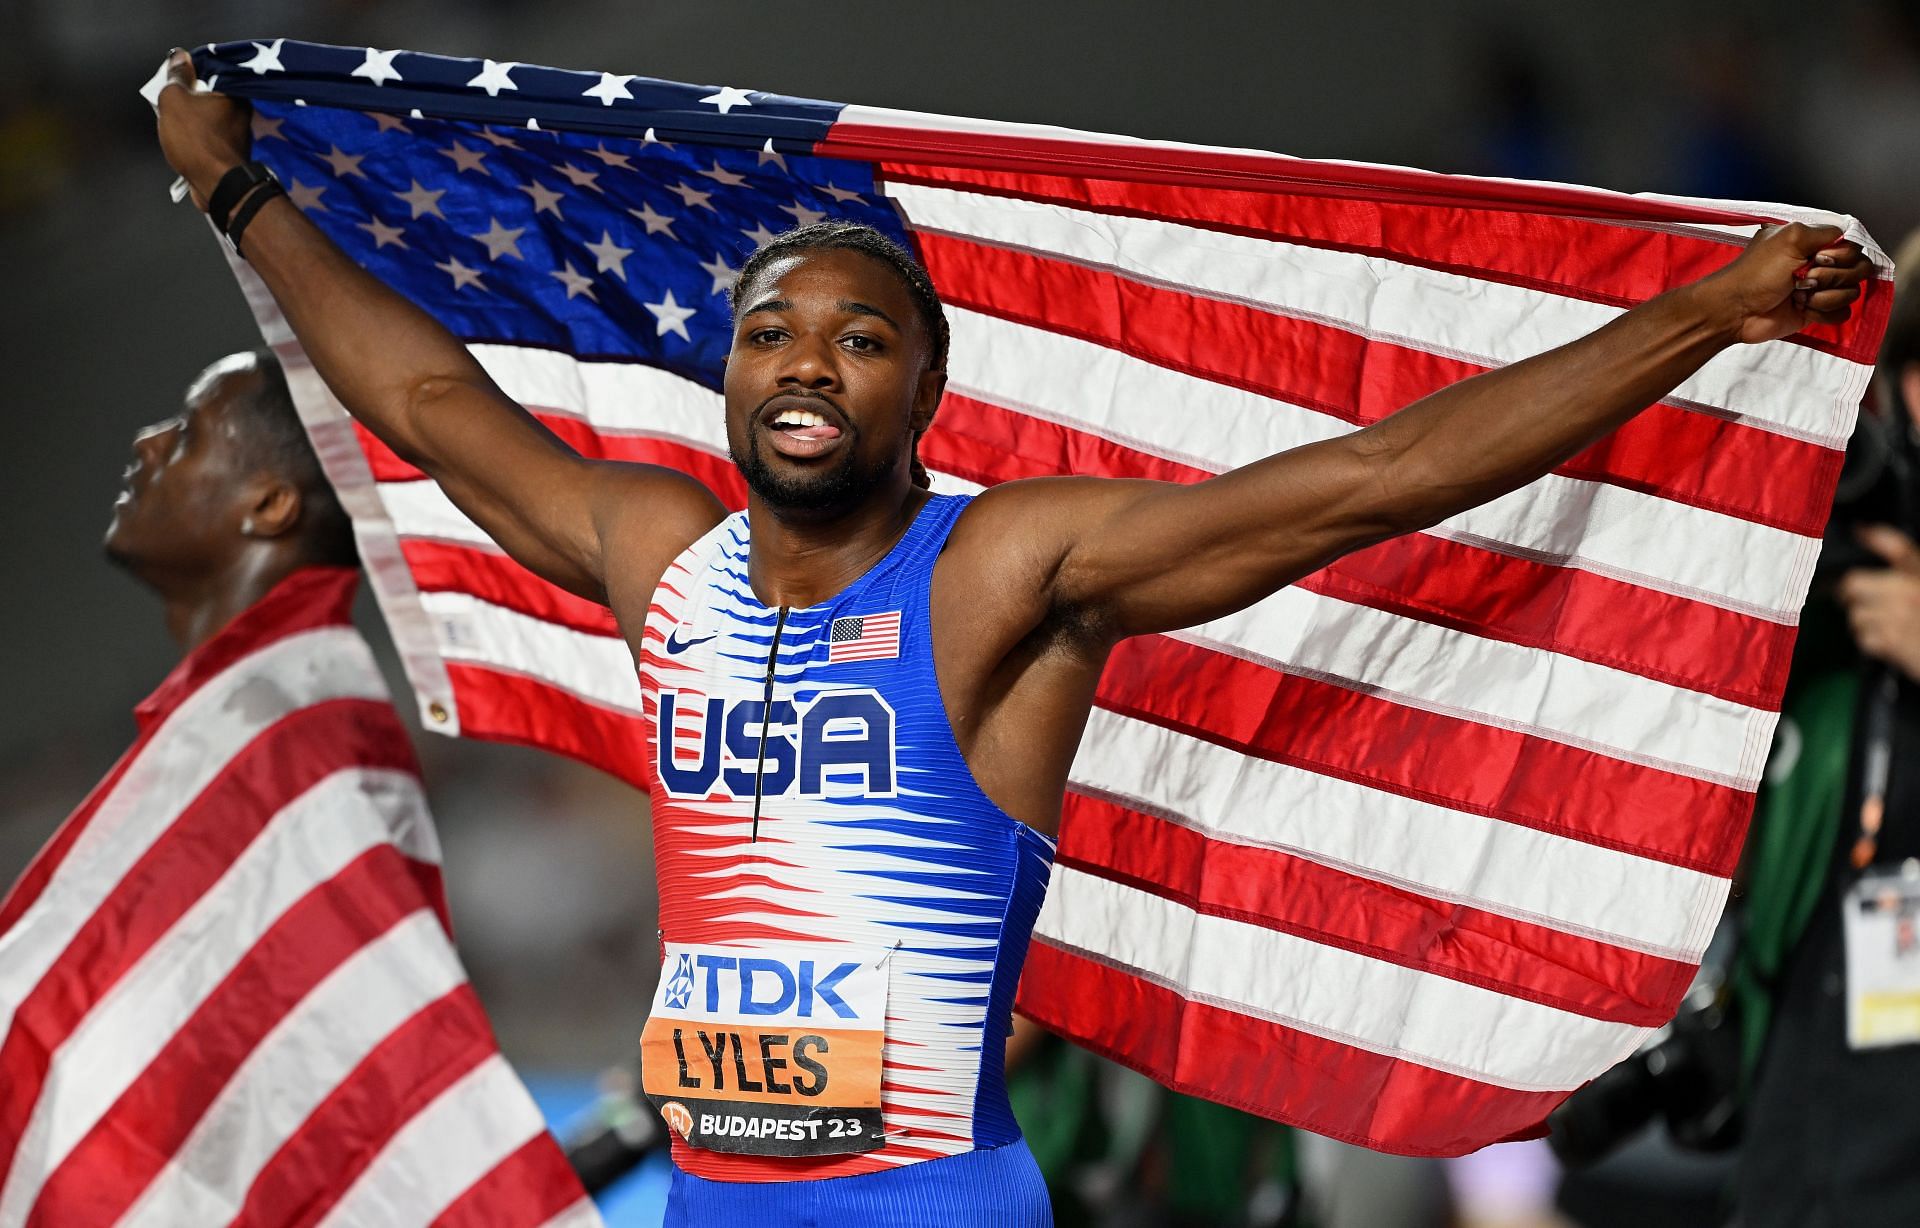 Noah Lyles celebrates after winning the Men&#039;s 4x100m Relay at the 2023 World Athletics Championships in Budapest, Hungary.